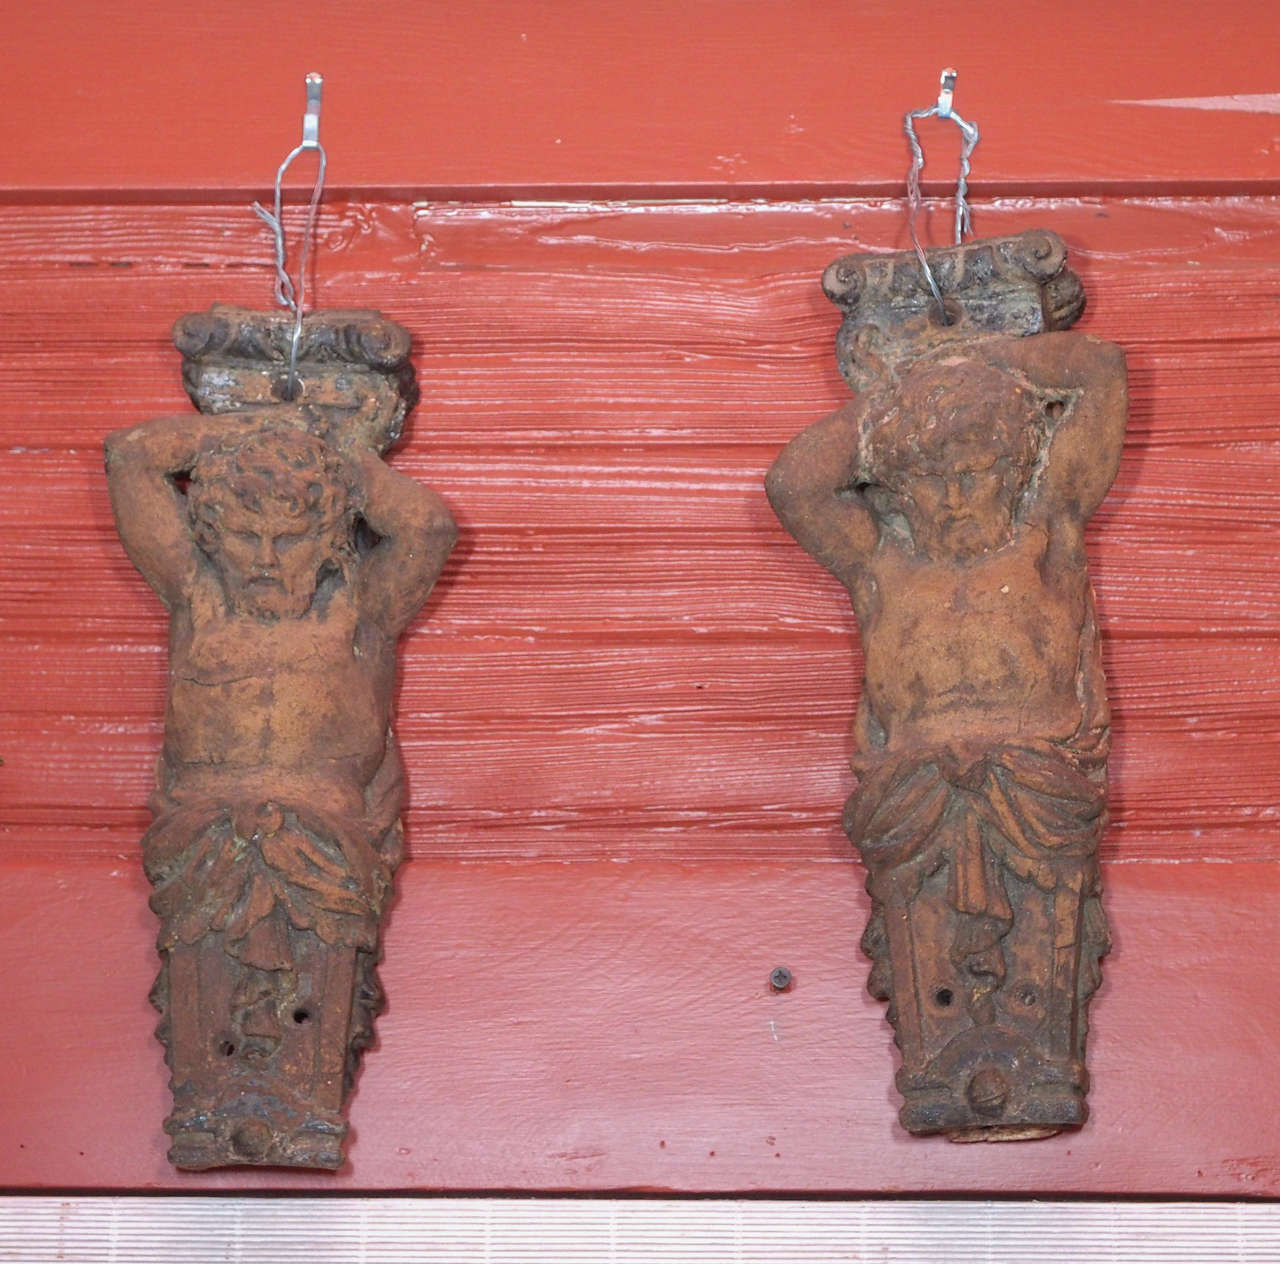 A pair of fabulous 18th century French figural terra cotta brackets or corbels.
Two atlantes holding a bracket above their heads with a draped sash around
their middle.